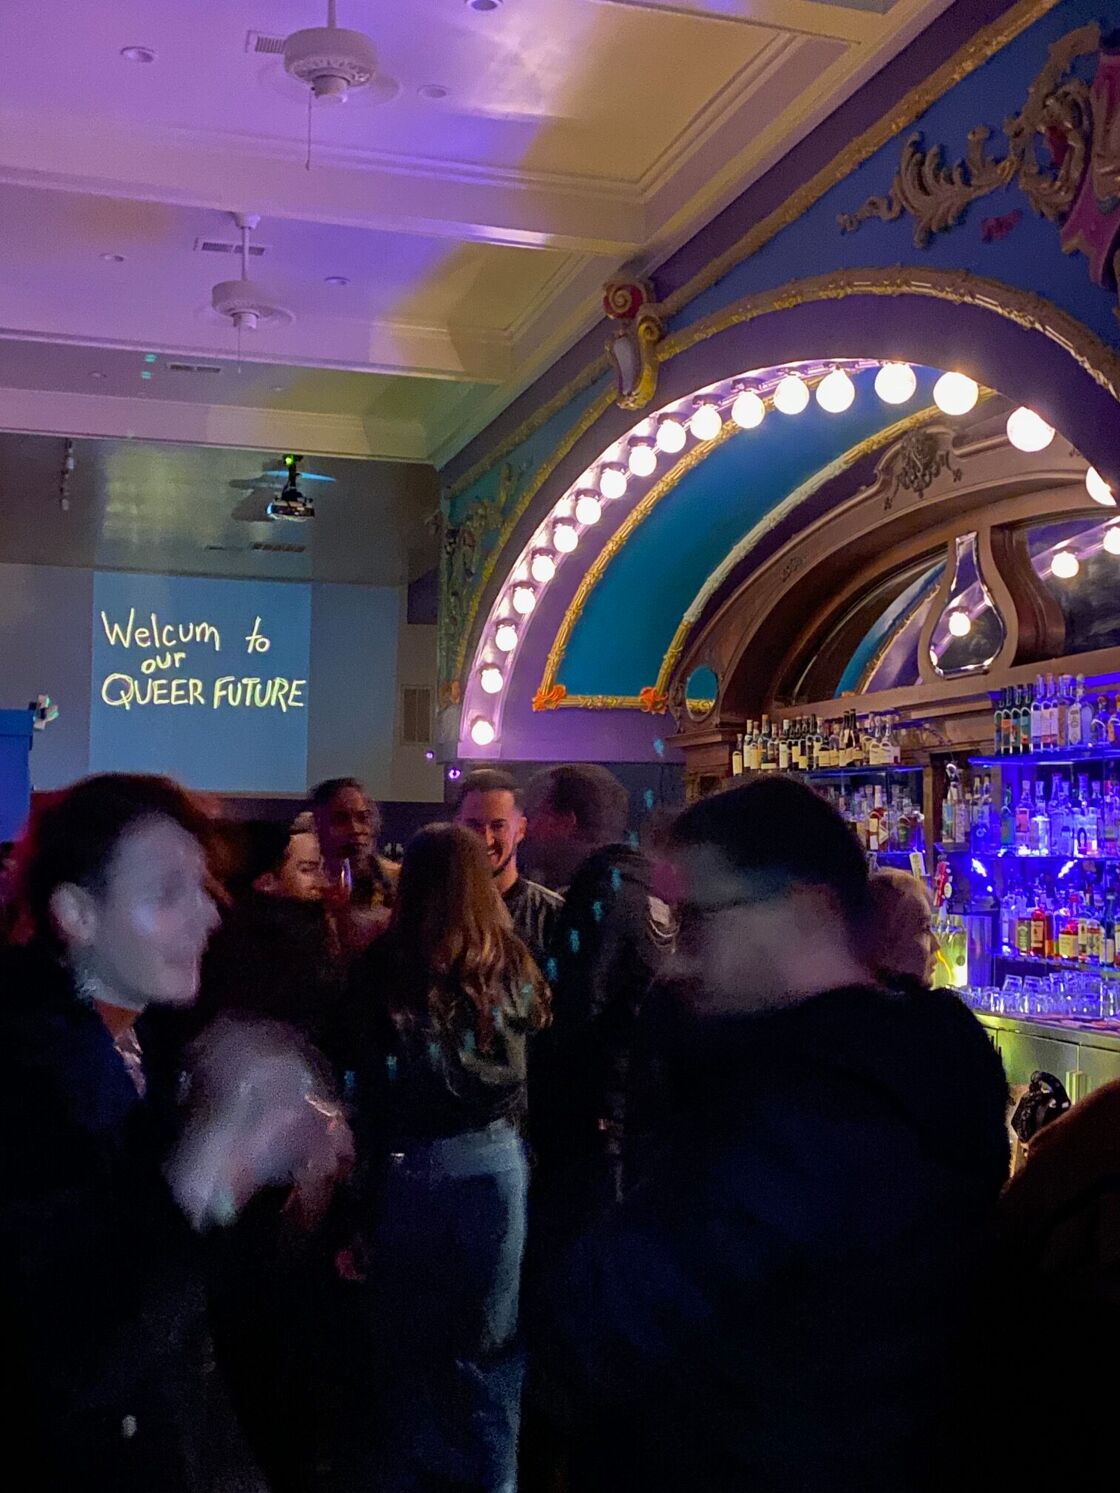 Inside Mother, the ornate mulit-colored bar resembles a cinema marquee. A bouquet of queers mingle under a sign that says "Welcum to our Queer Future"